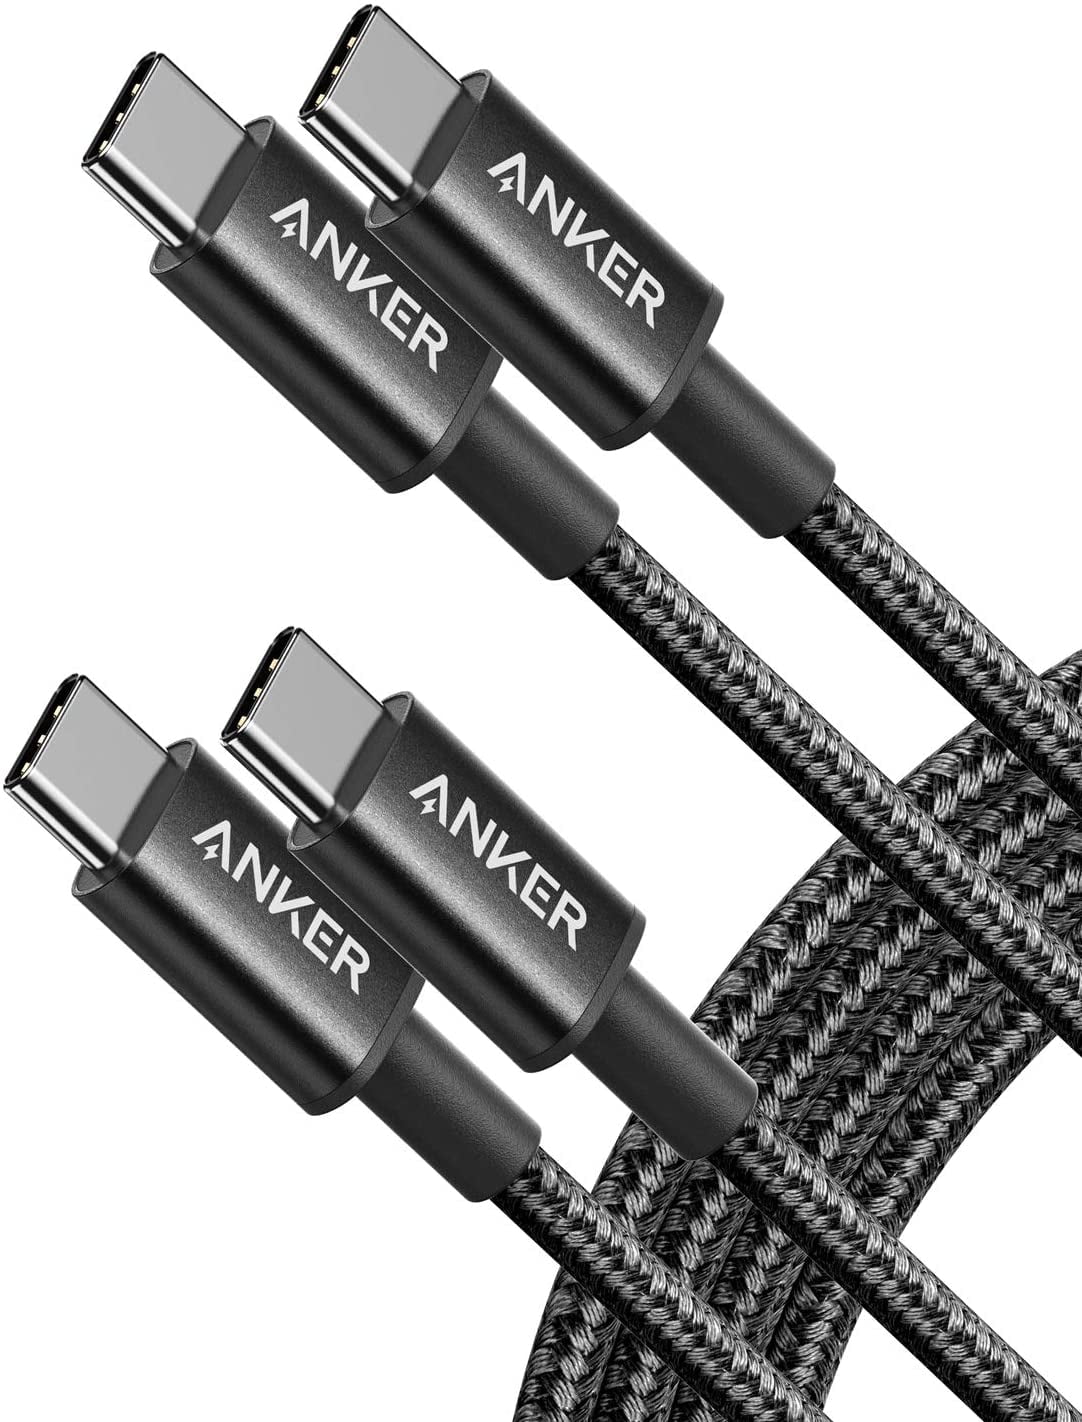 Anker Powerline II USB C Cable USB-C to USB-C 3.1 Gen 2 Cable with